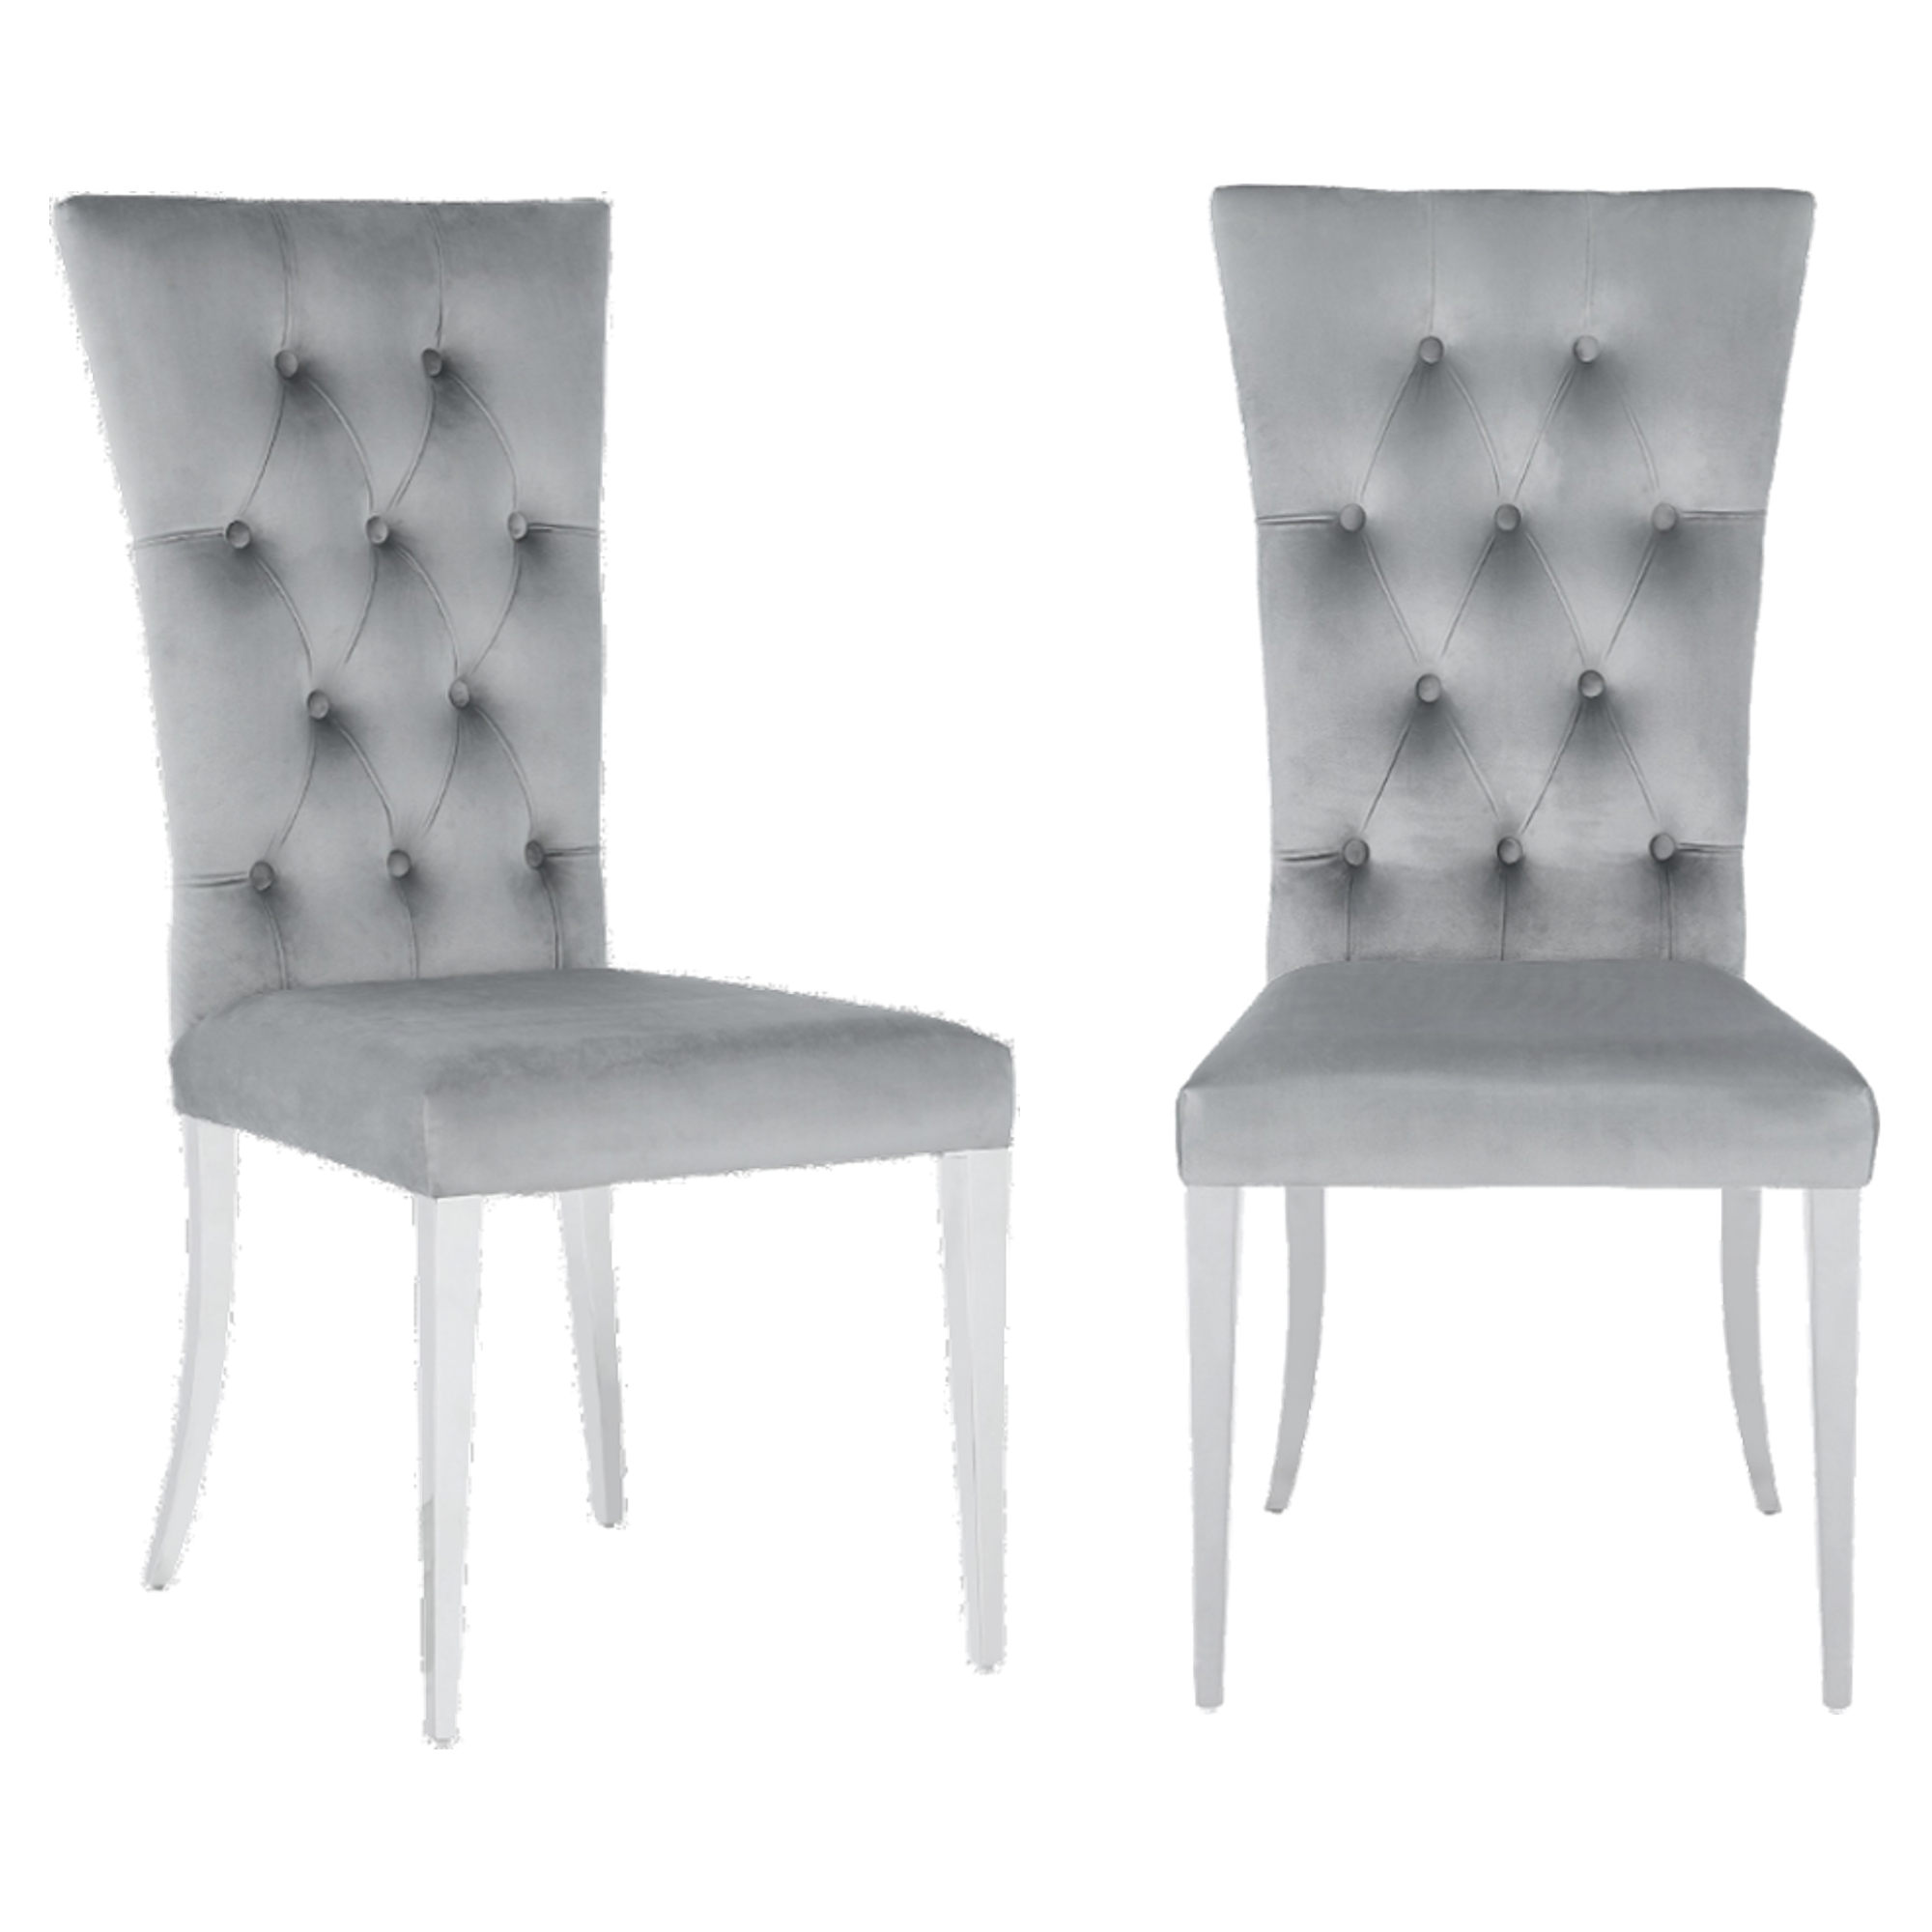 Kerwin Tufted Upholstered Side Chair (Set Of 2)